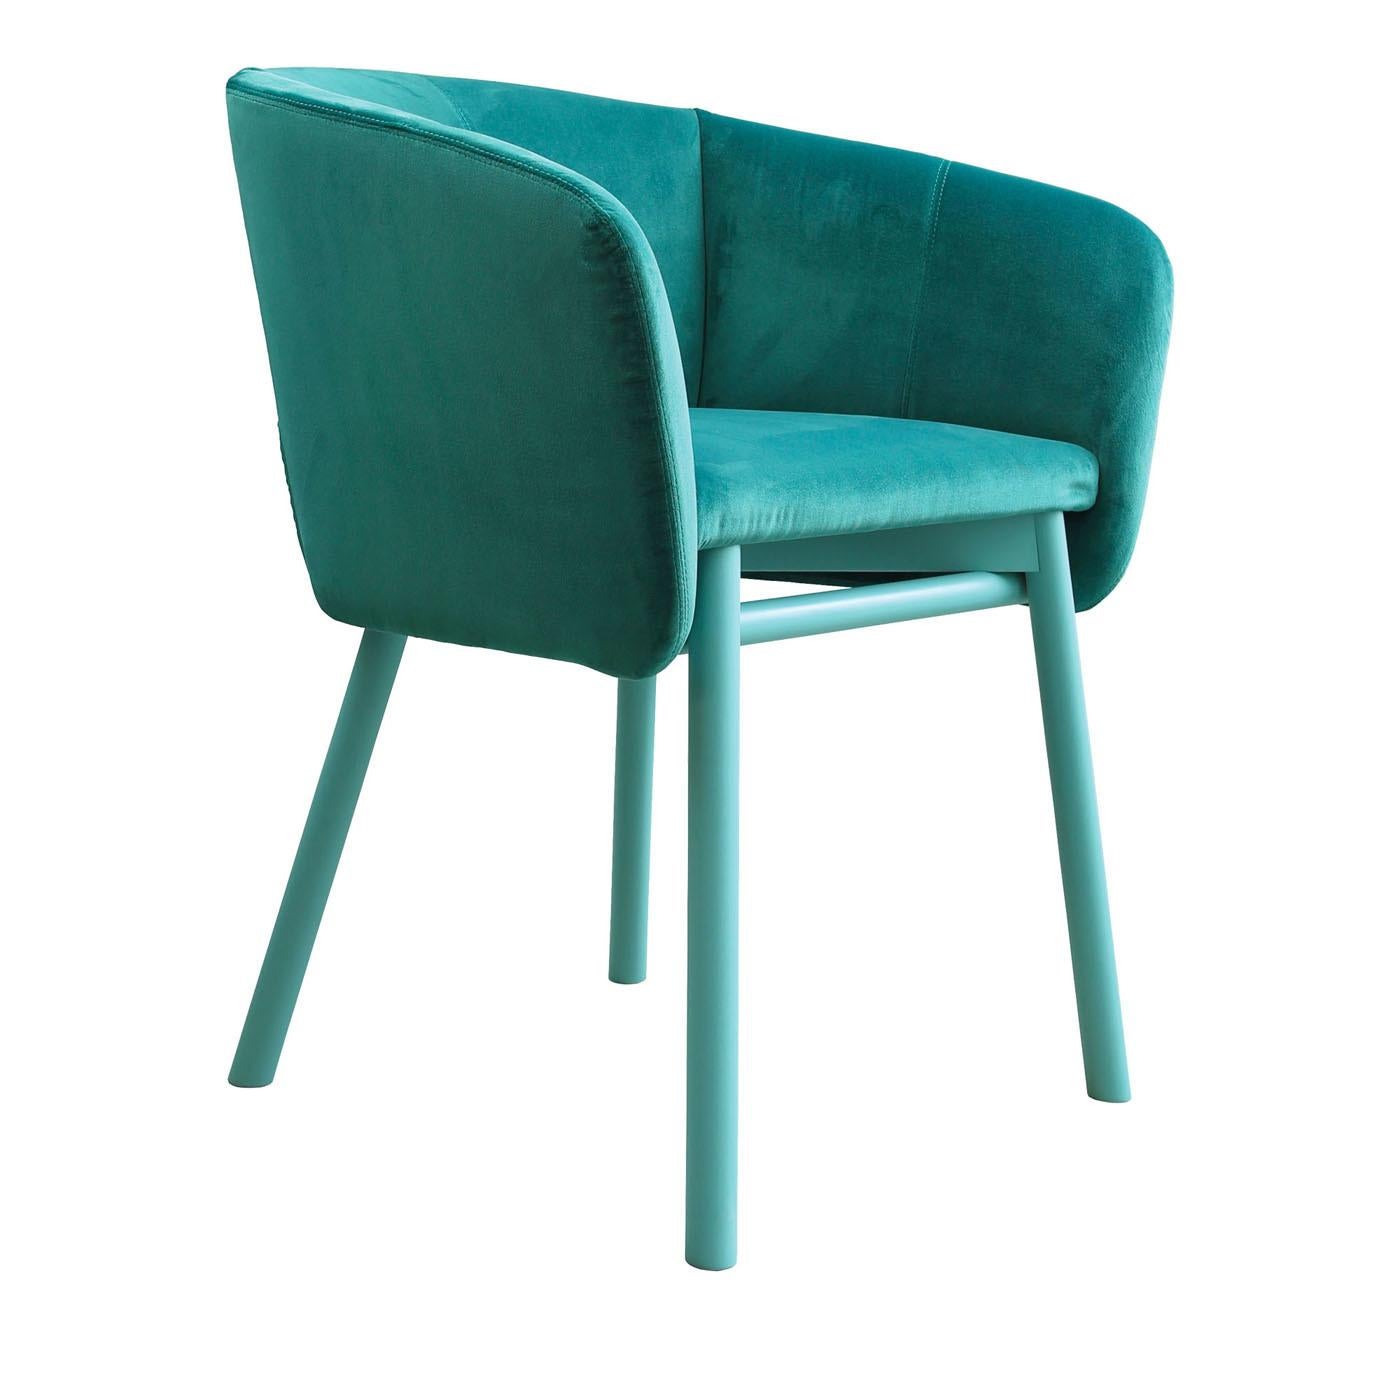 A modern interpretation of the traditional tub chair, this piece is an elegant and comfortable piece of functional decor. It boasts an interlocking structure with slanted legs made of beechwood and lacquered in emerald green, the same color covering